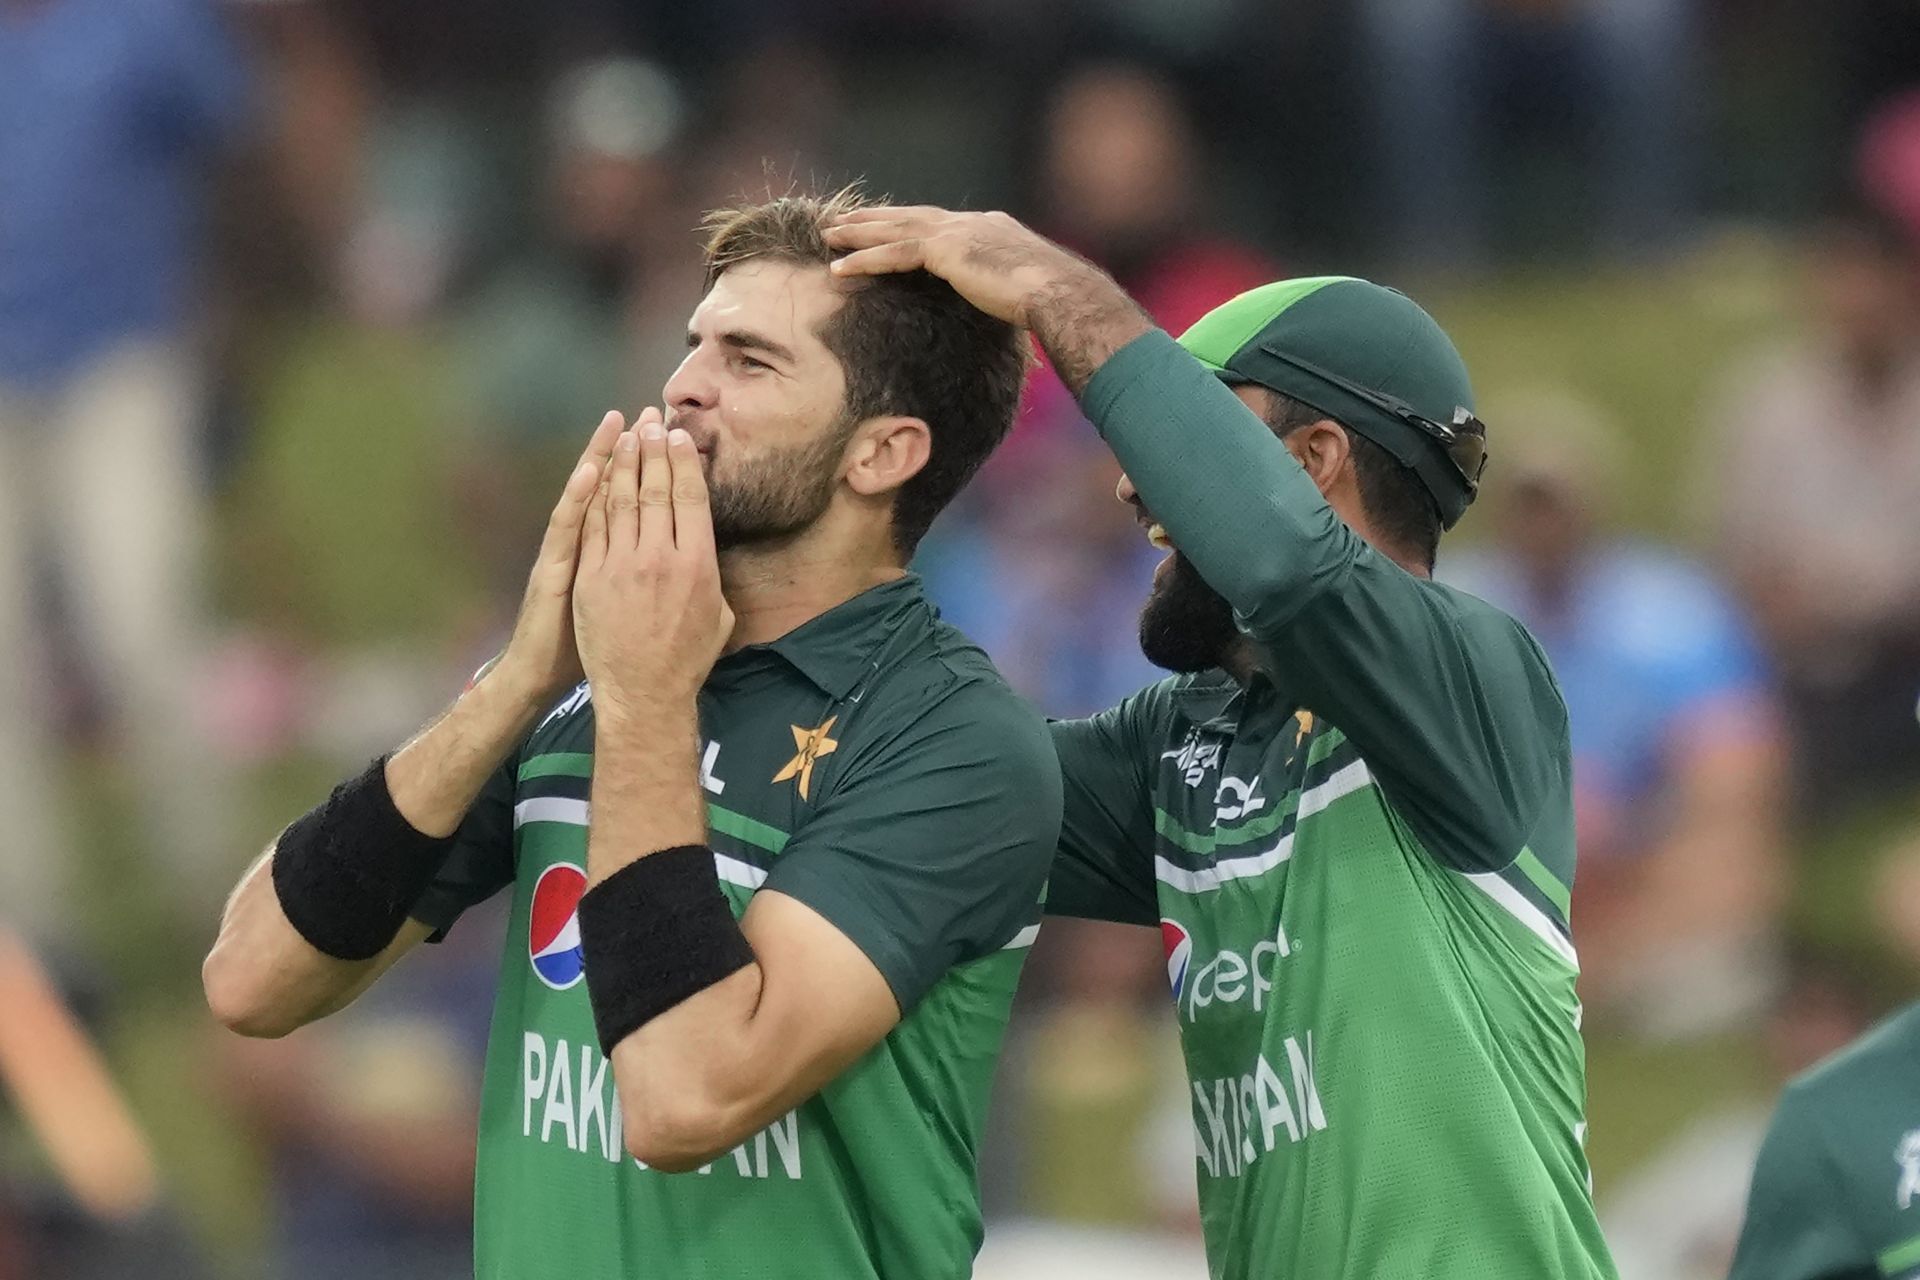 He bowls to the left, he bowls to the right, this Shaheen Afridi, he sets the bails alight